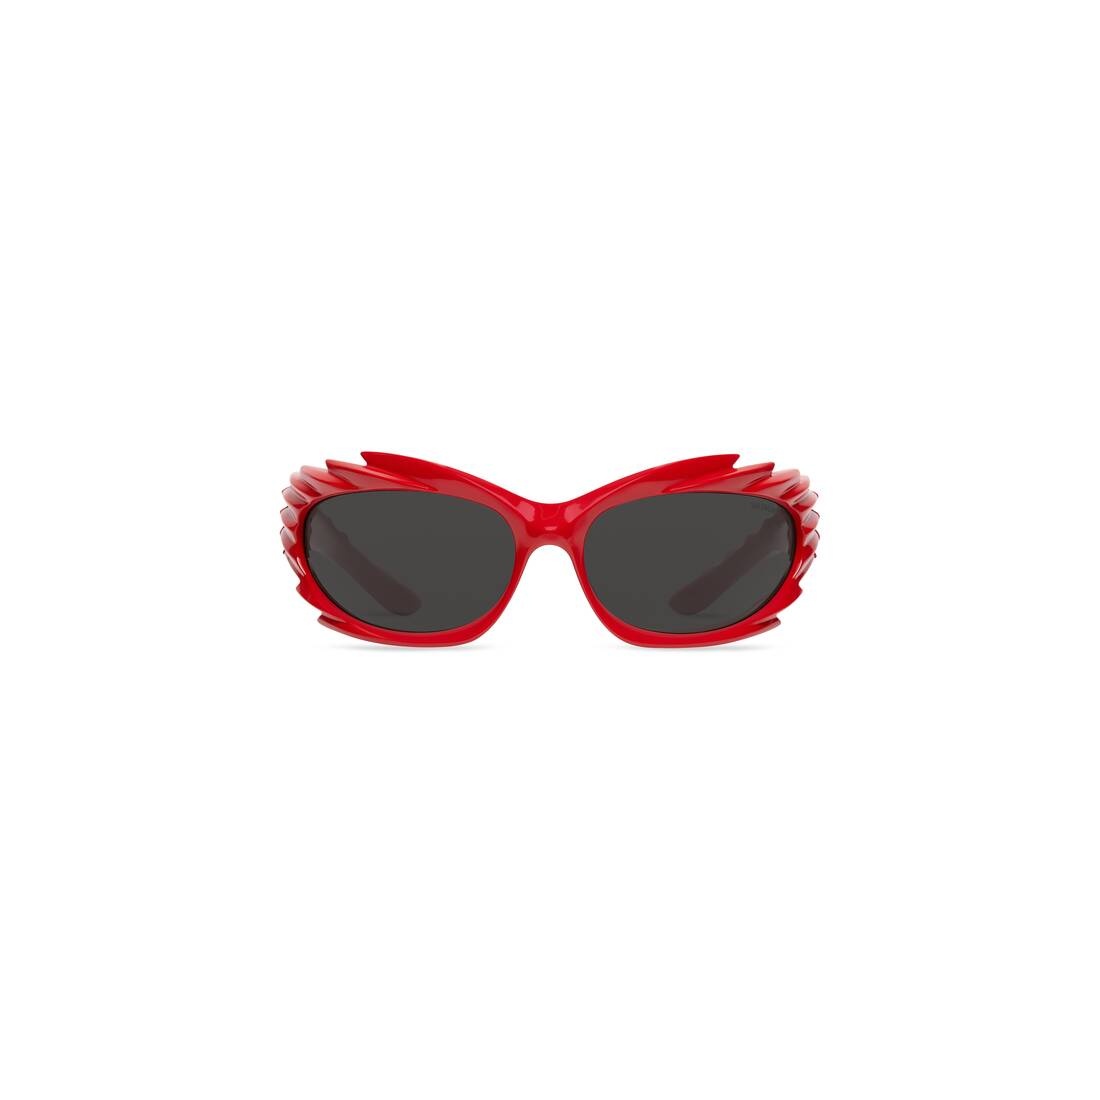 Spike Rectangle Sunglasses in Red